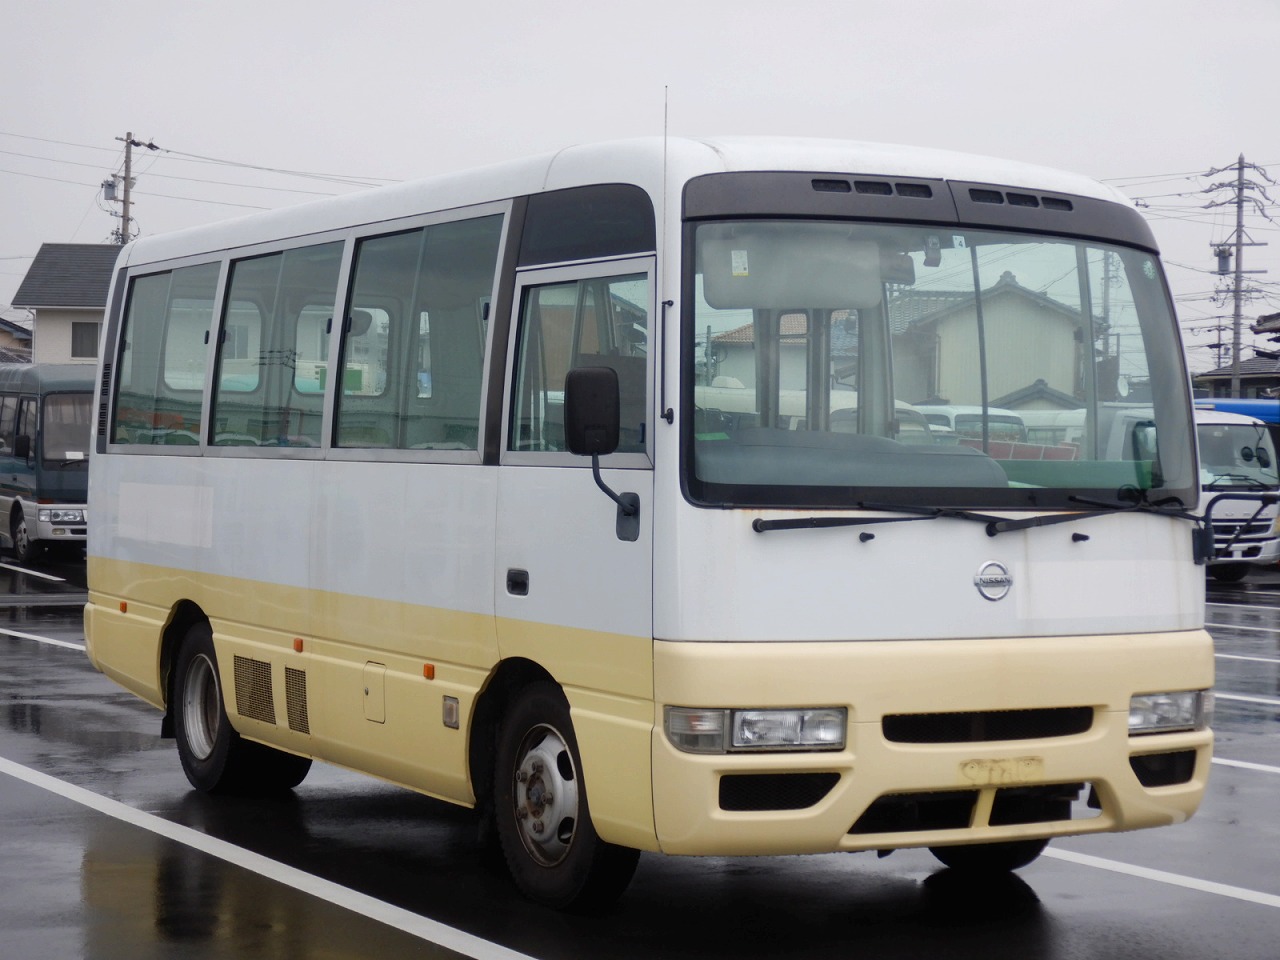 Used NISSAN CIVILIAN BUS 2010/Mar CFJ6837854 in good condition for 